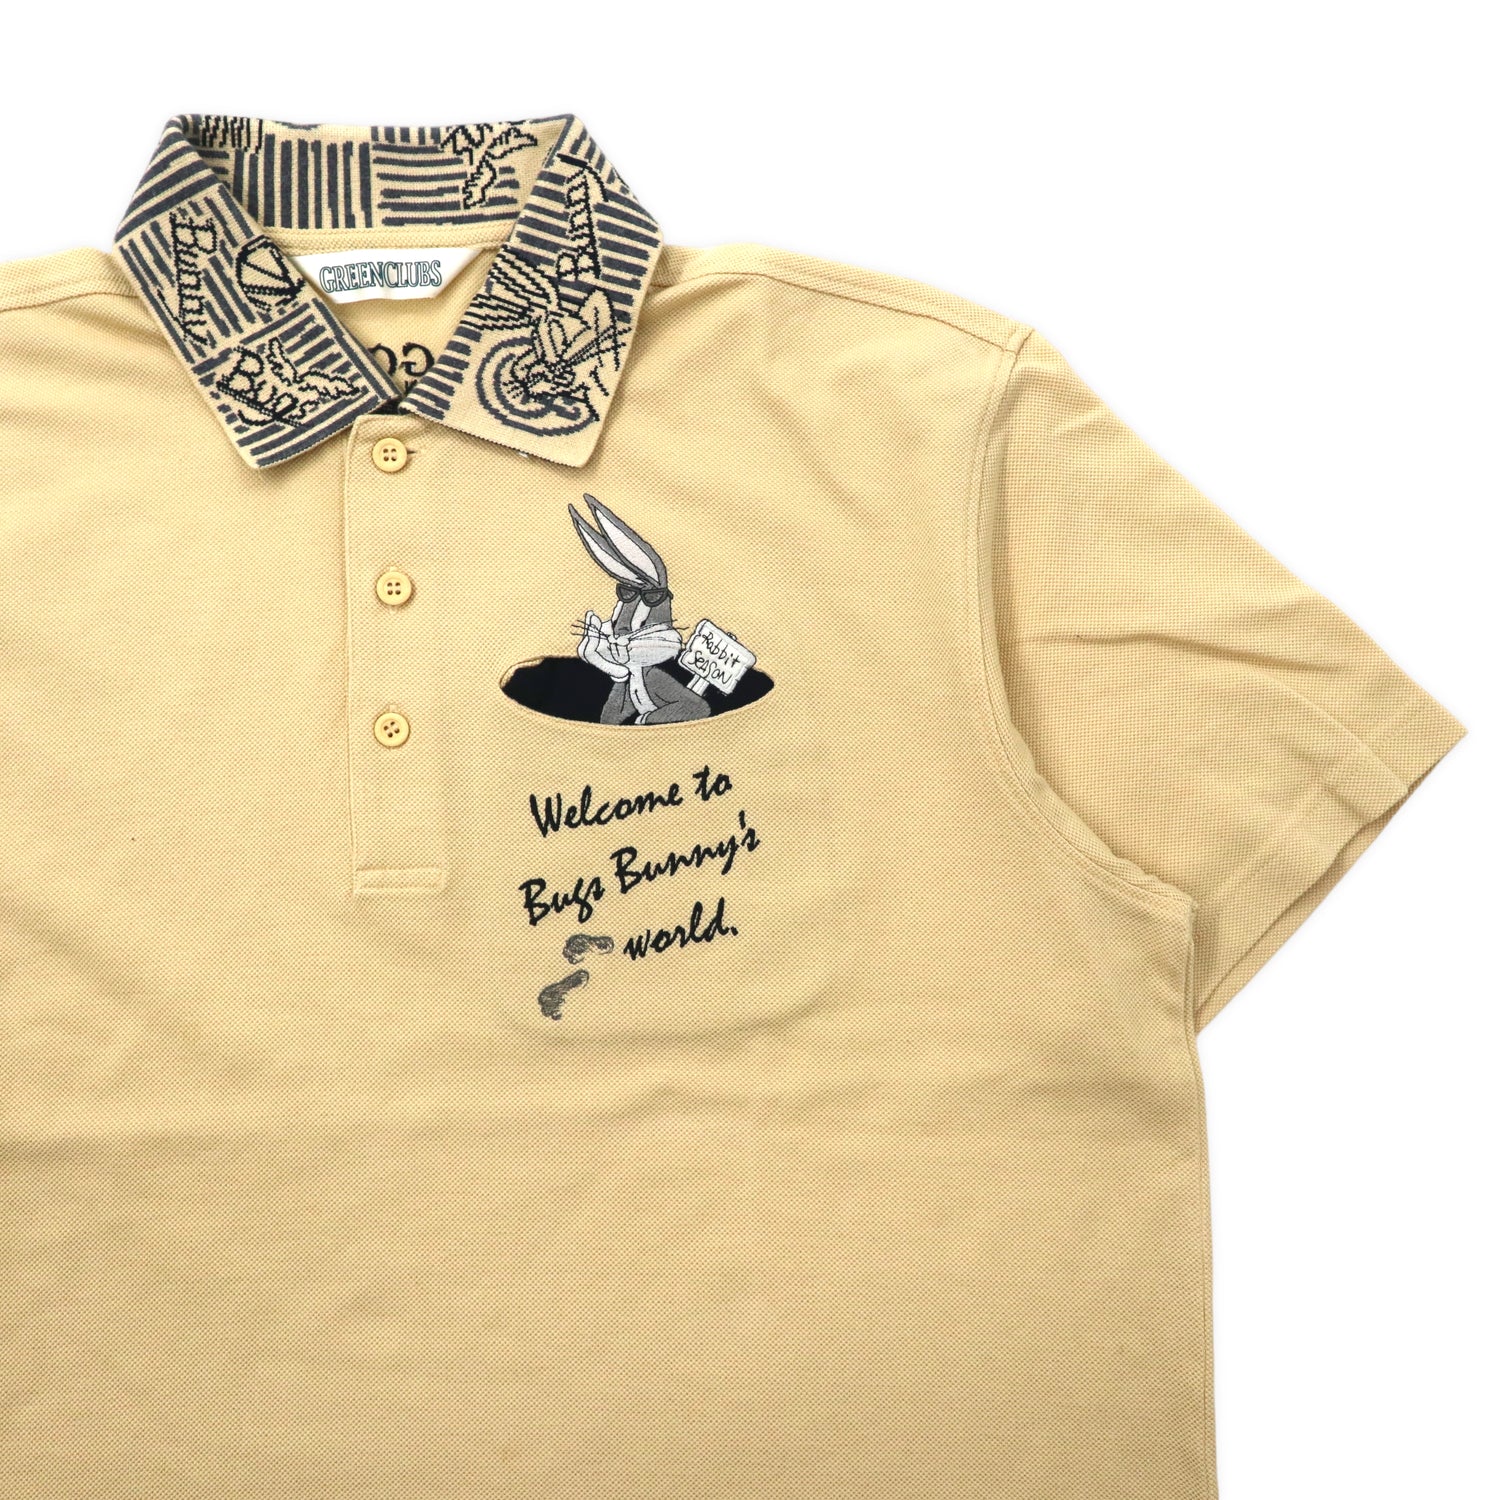 Green Clubs x Warner Bros. 90s Character embroidery polo shirt 5 